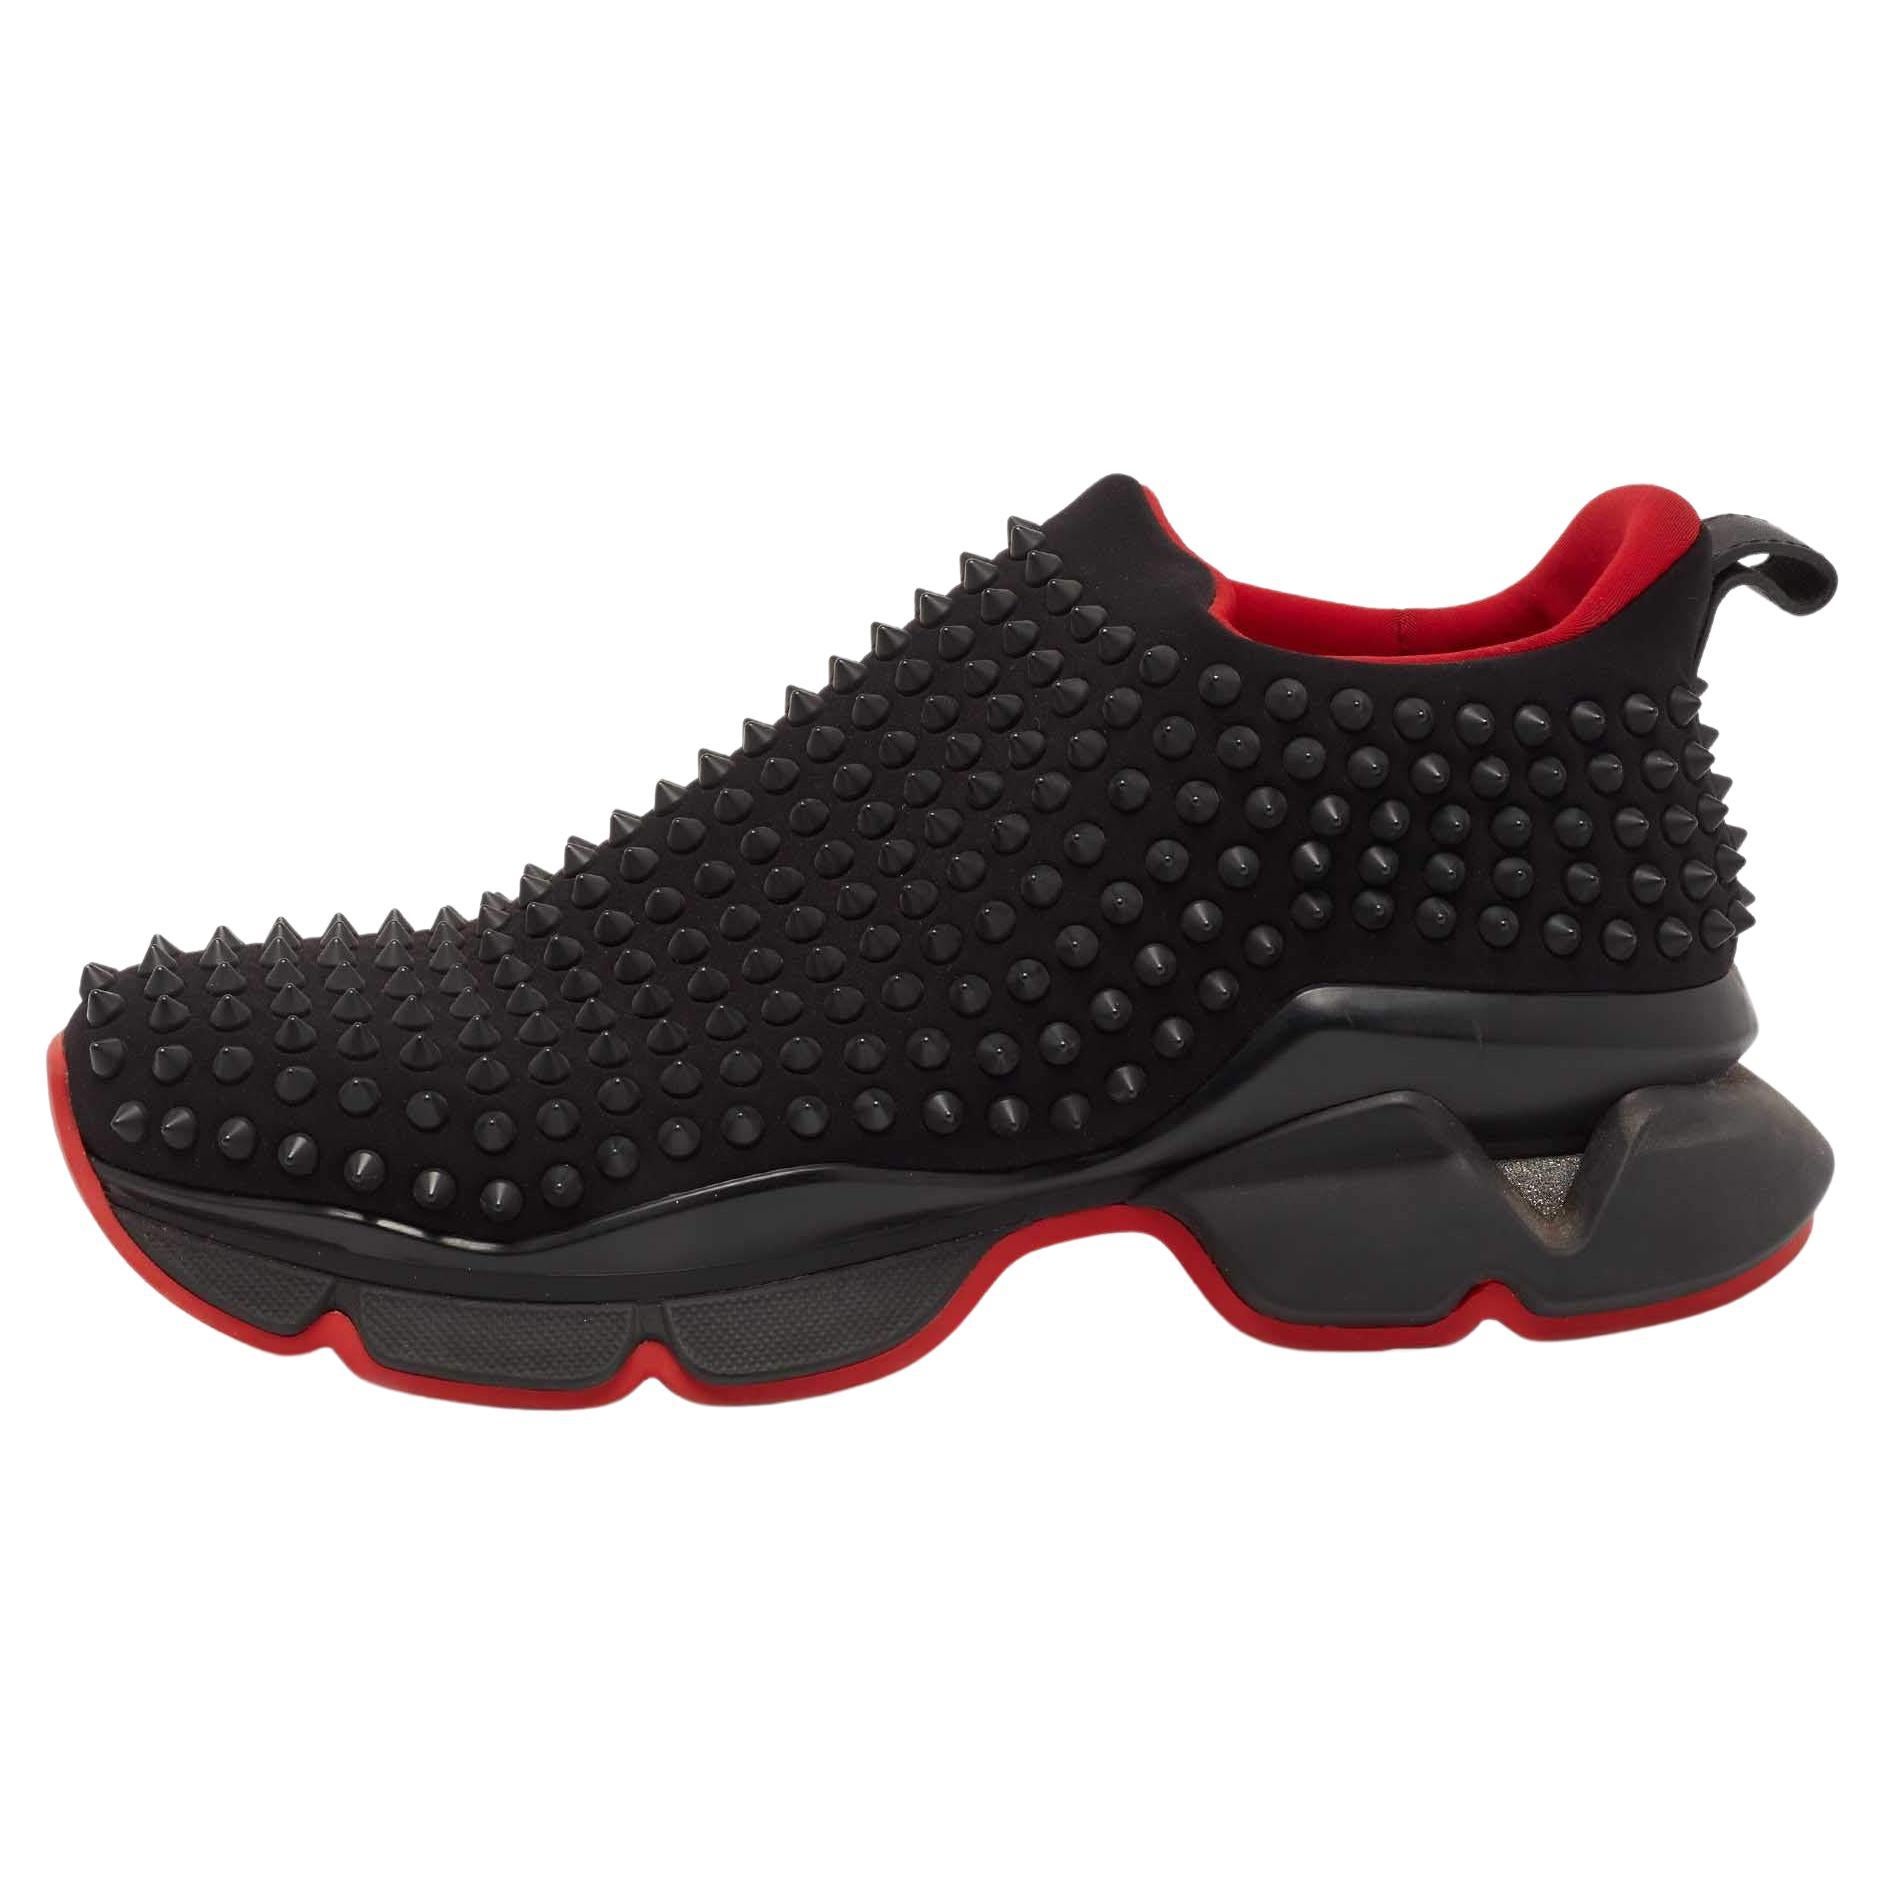 Christian Louboutin Red Suede Spike Accent Slip On Sneakers